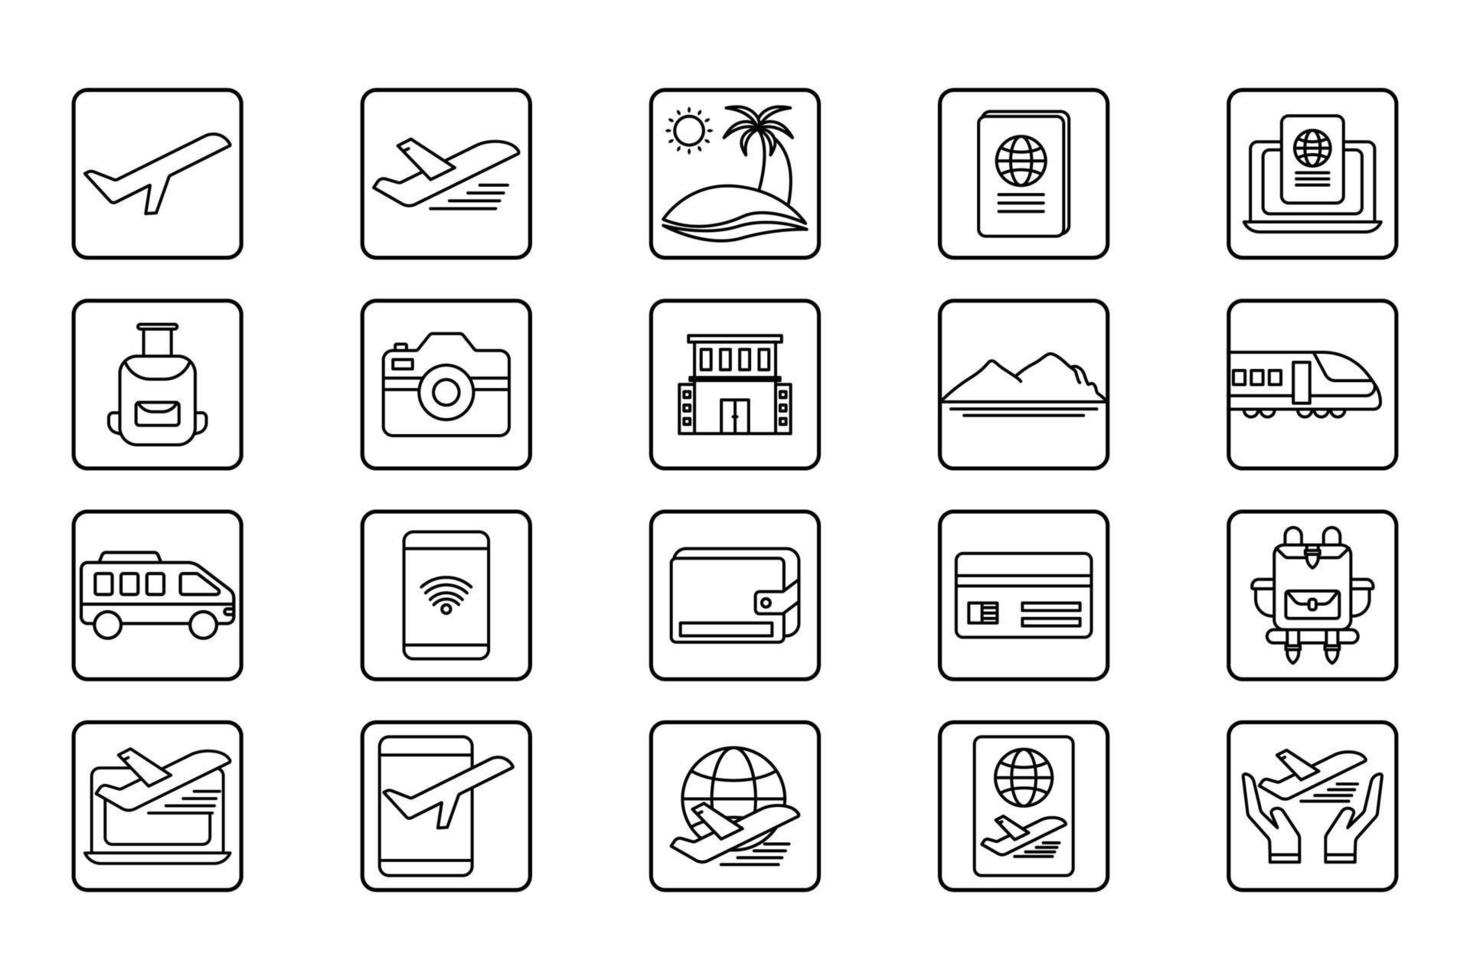 Travel set icon illustration. icon related to Transportation, holiday, tourists. Outline icon style. Simple vector design editable